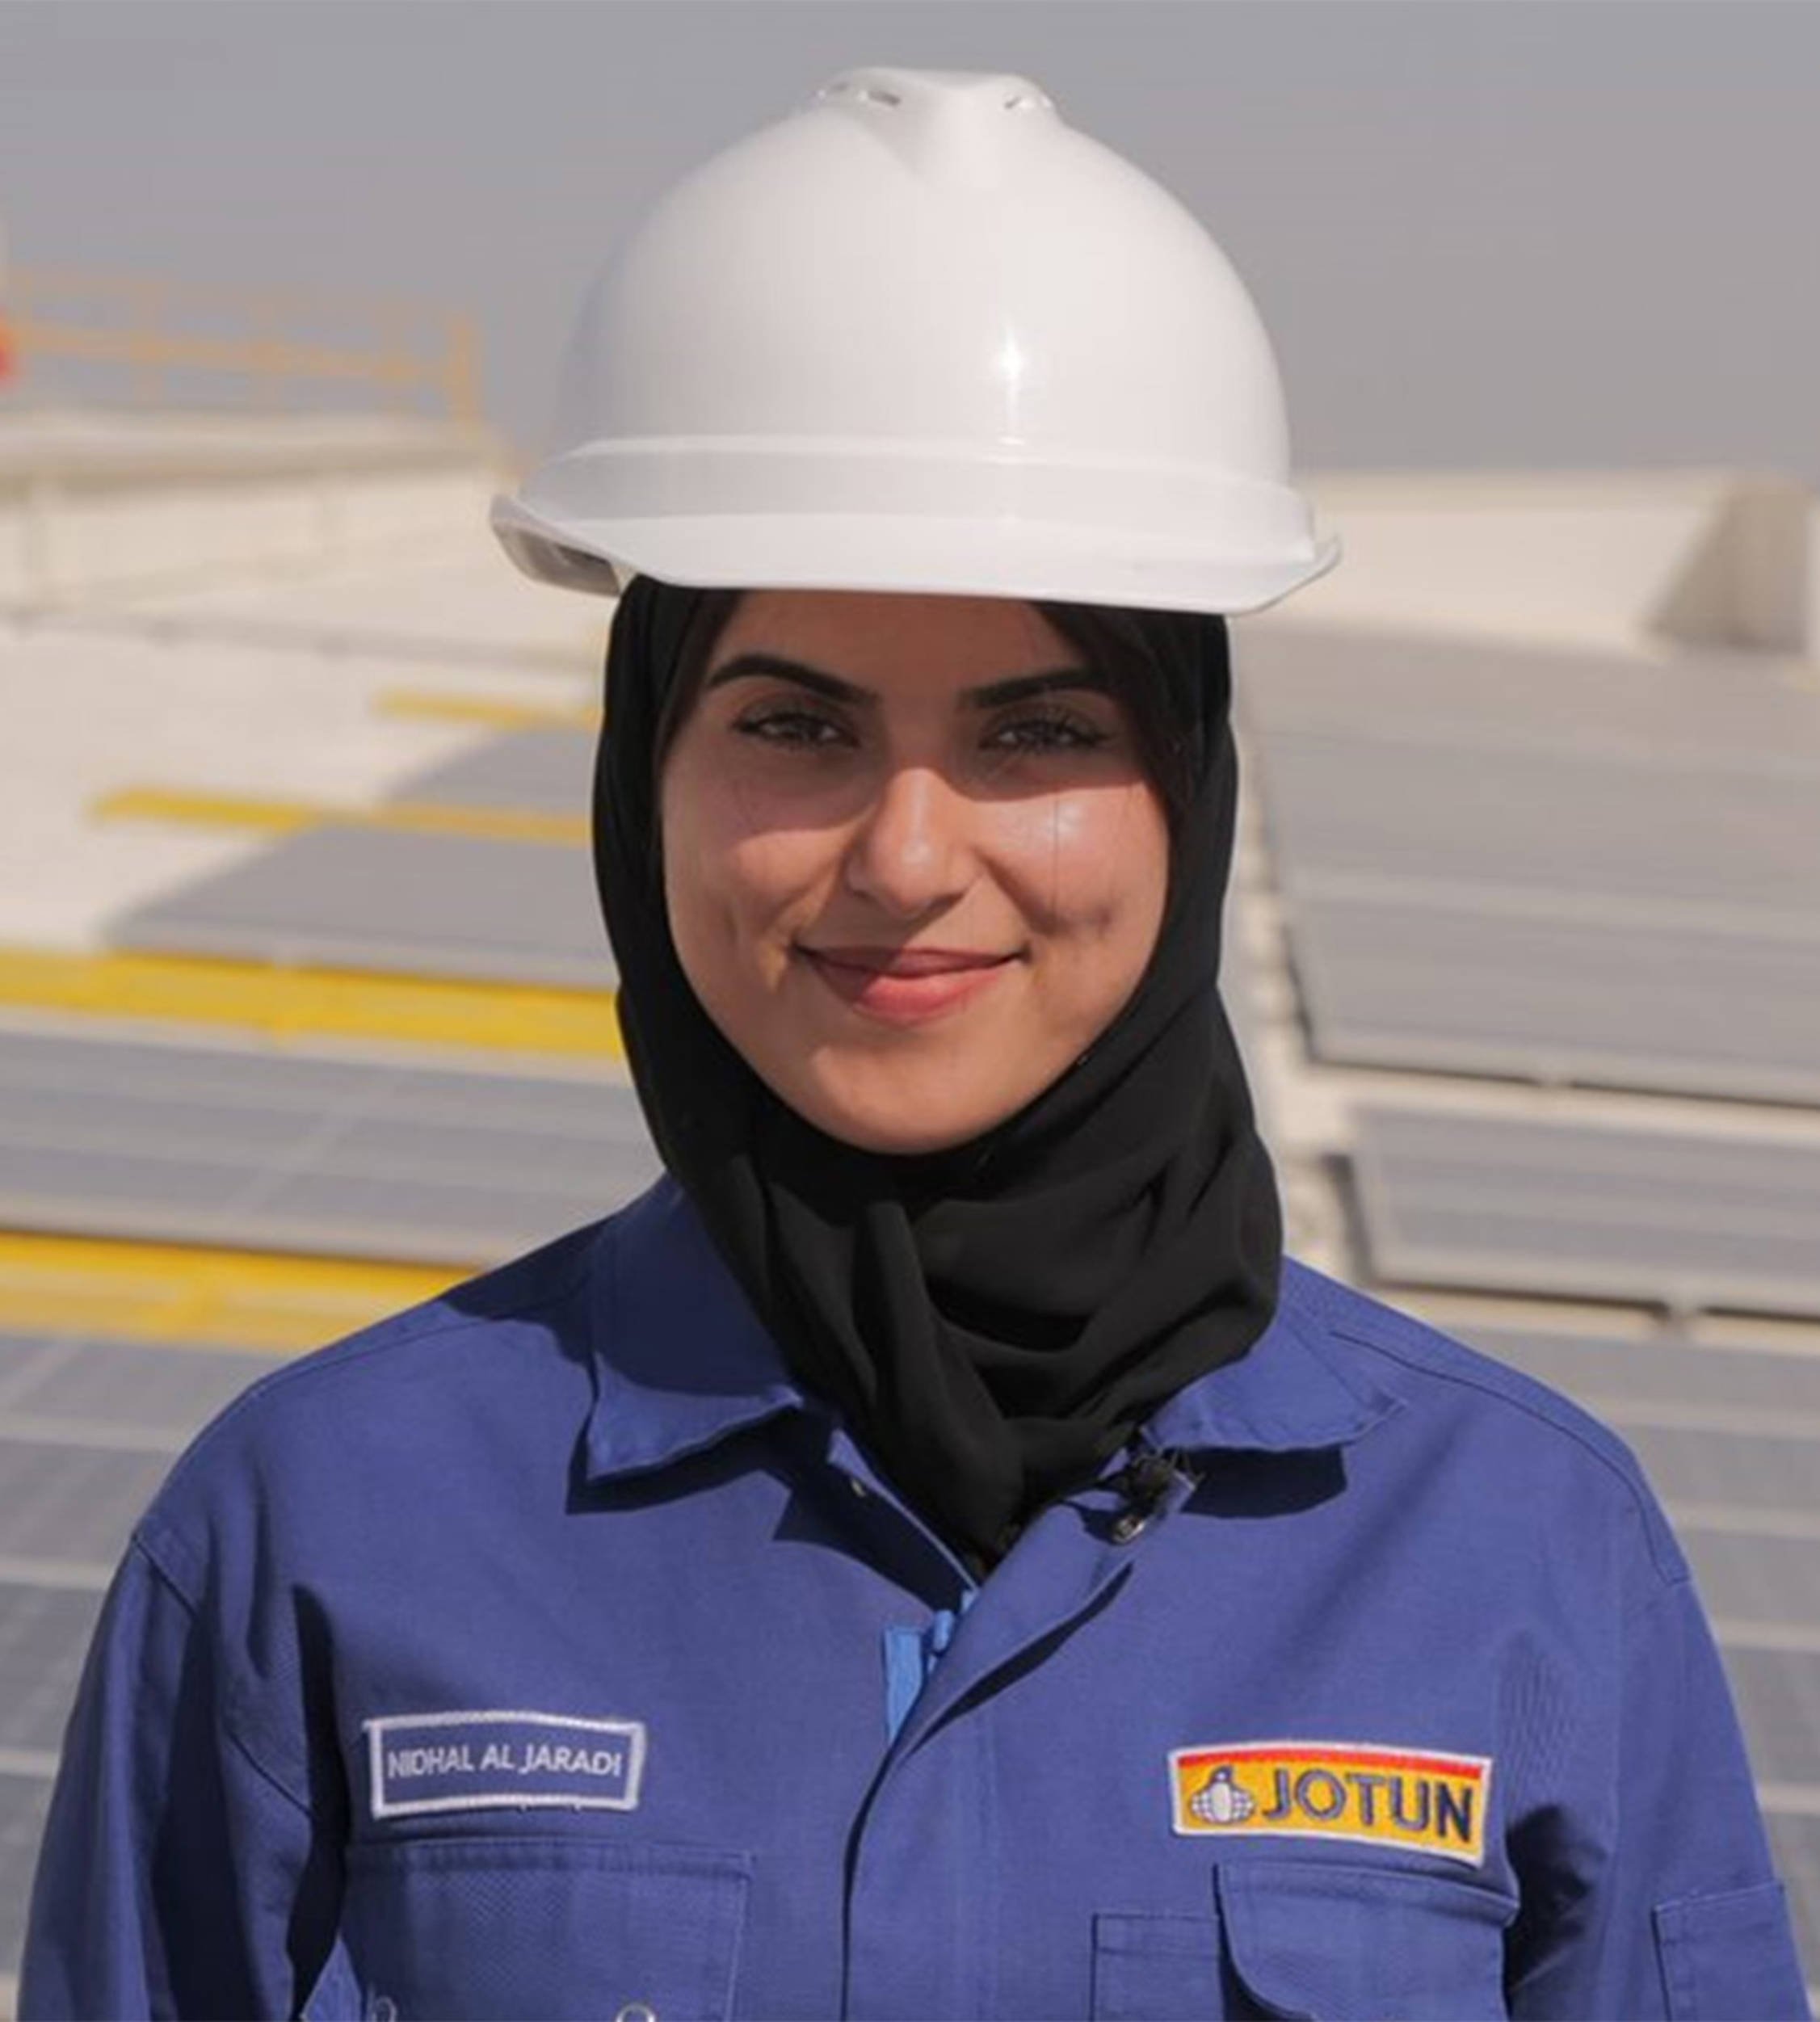 Woman on rooftop of the Jotun factory in Oman